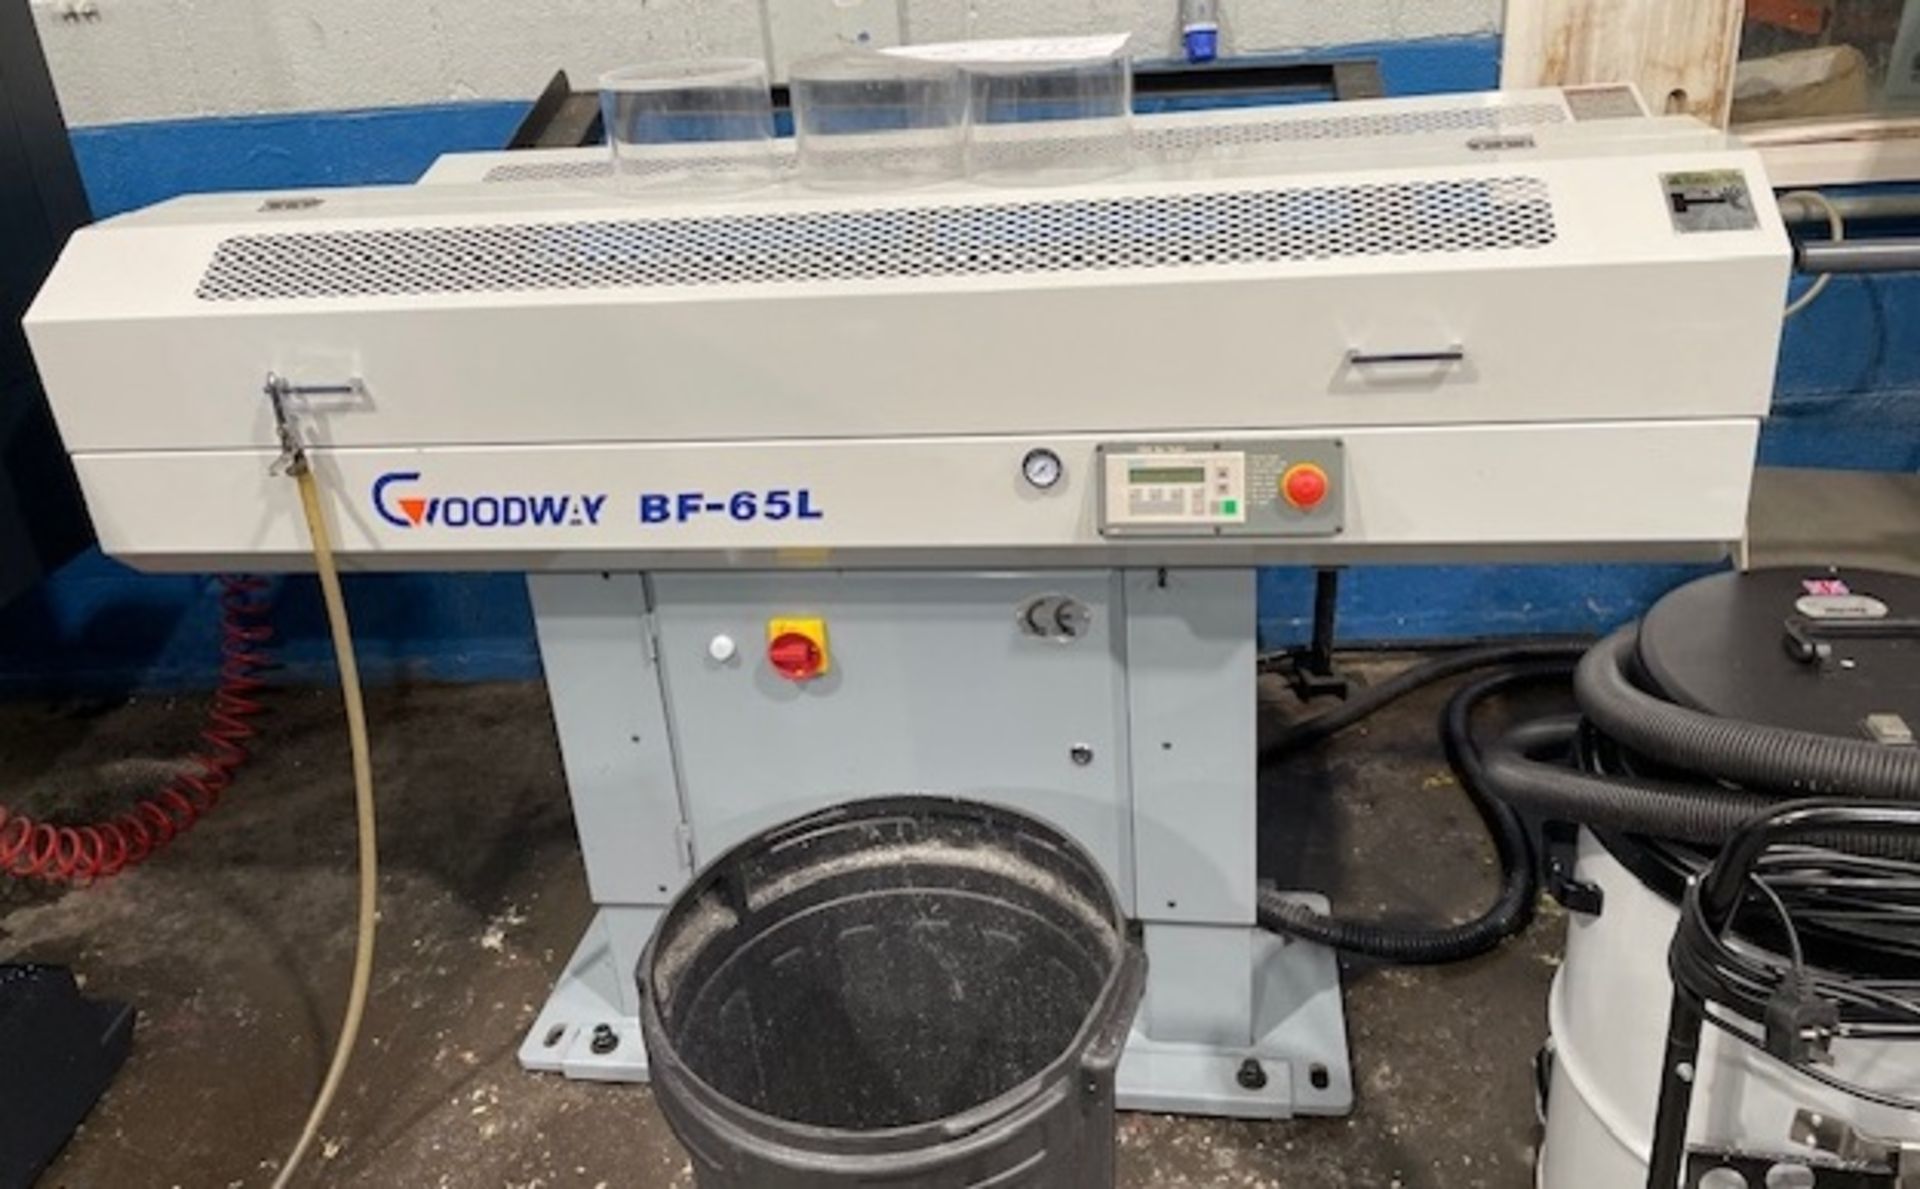 Goodway TA-32 CNC Lathe (2002) Serial Number 81692 with Goodway BF-654 Bar Feed (Location: Earls - Image 2 of 10